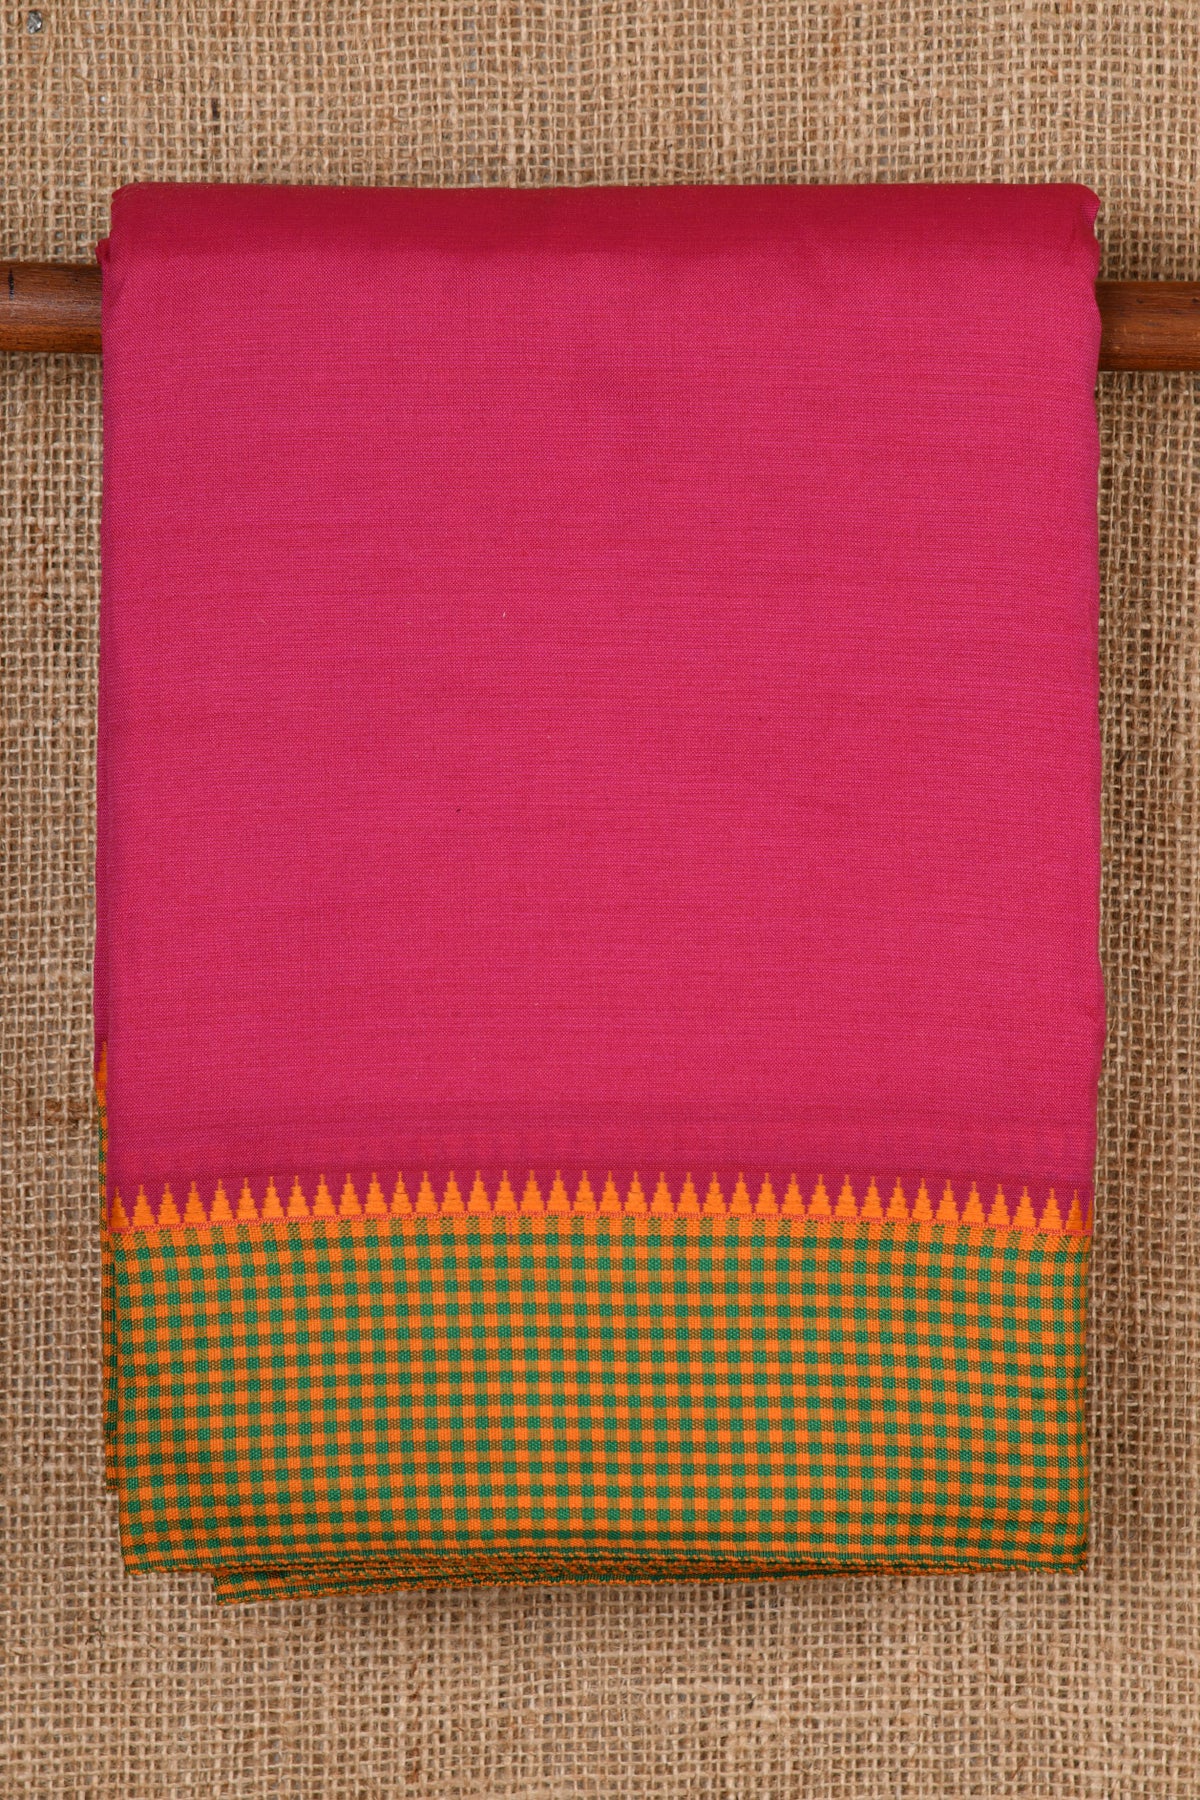 Checked Border With Pink Dharwad Cotton Saree